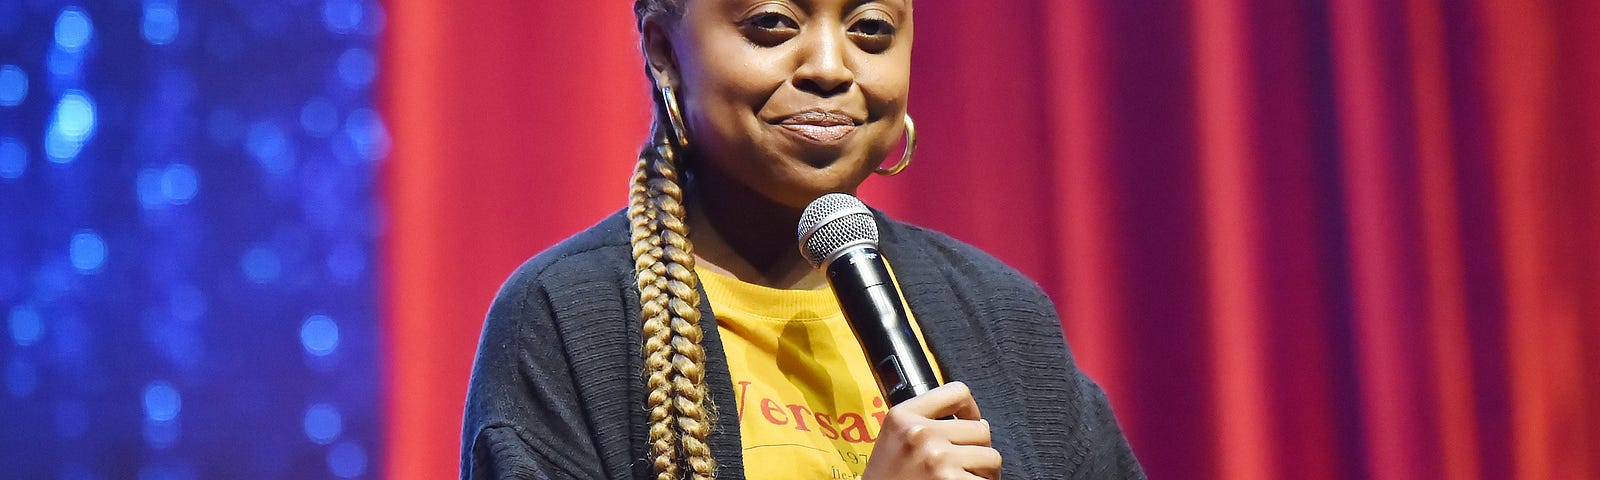 Quinta Brunson performs onstage at the 2019 Clusterfest on June 21, 2019 in San Francisco, California.